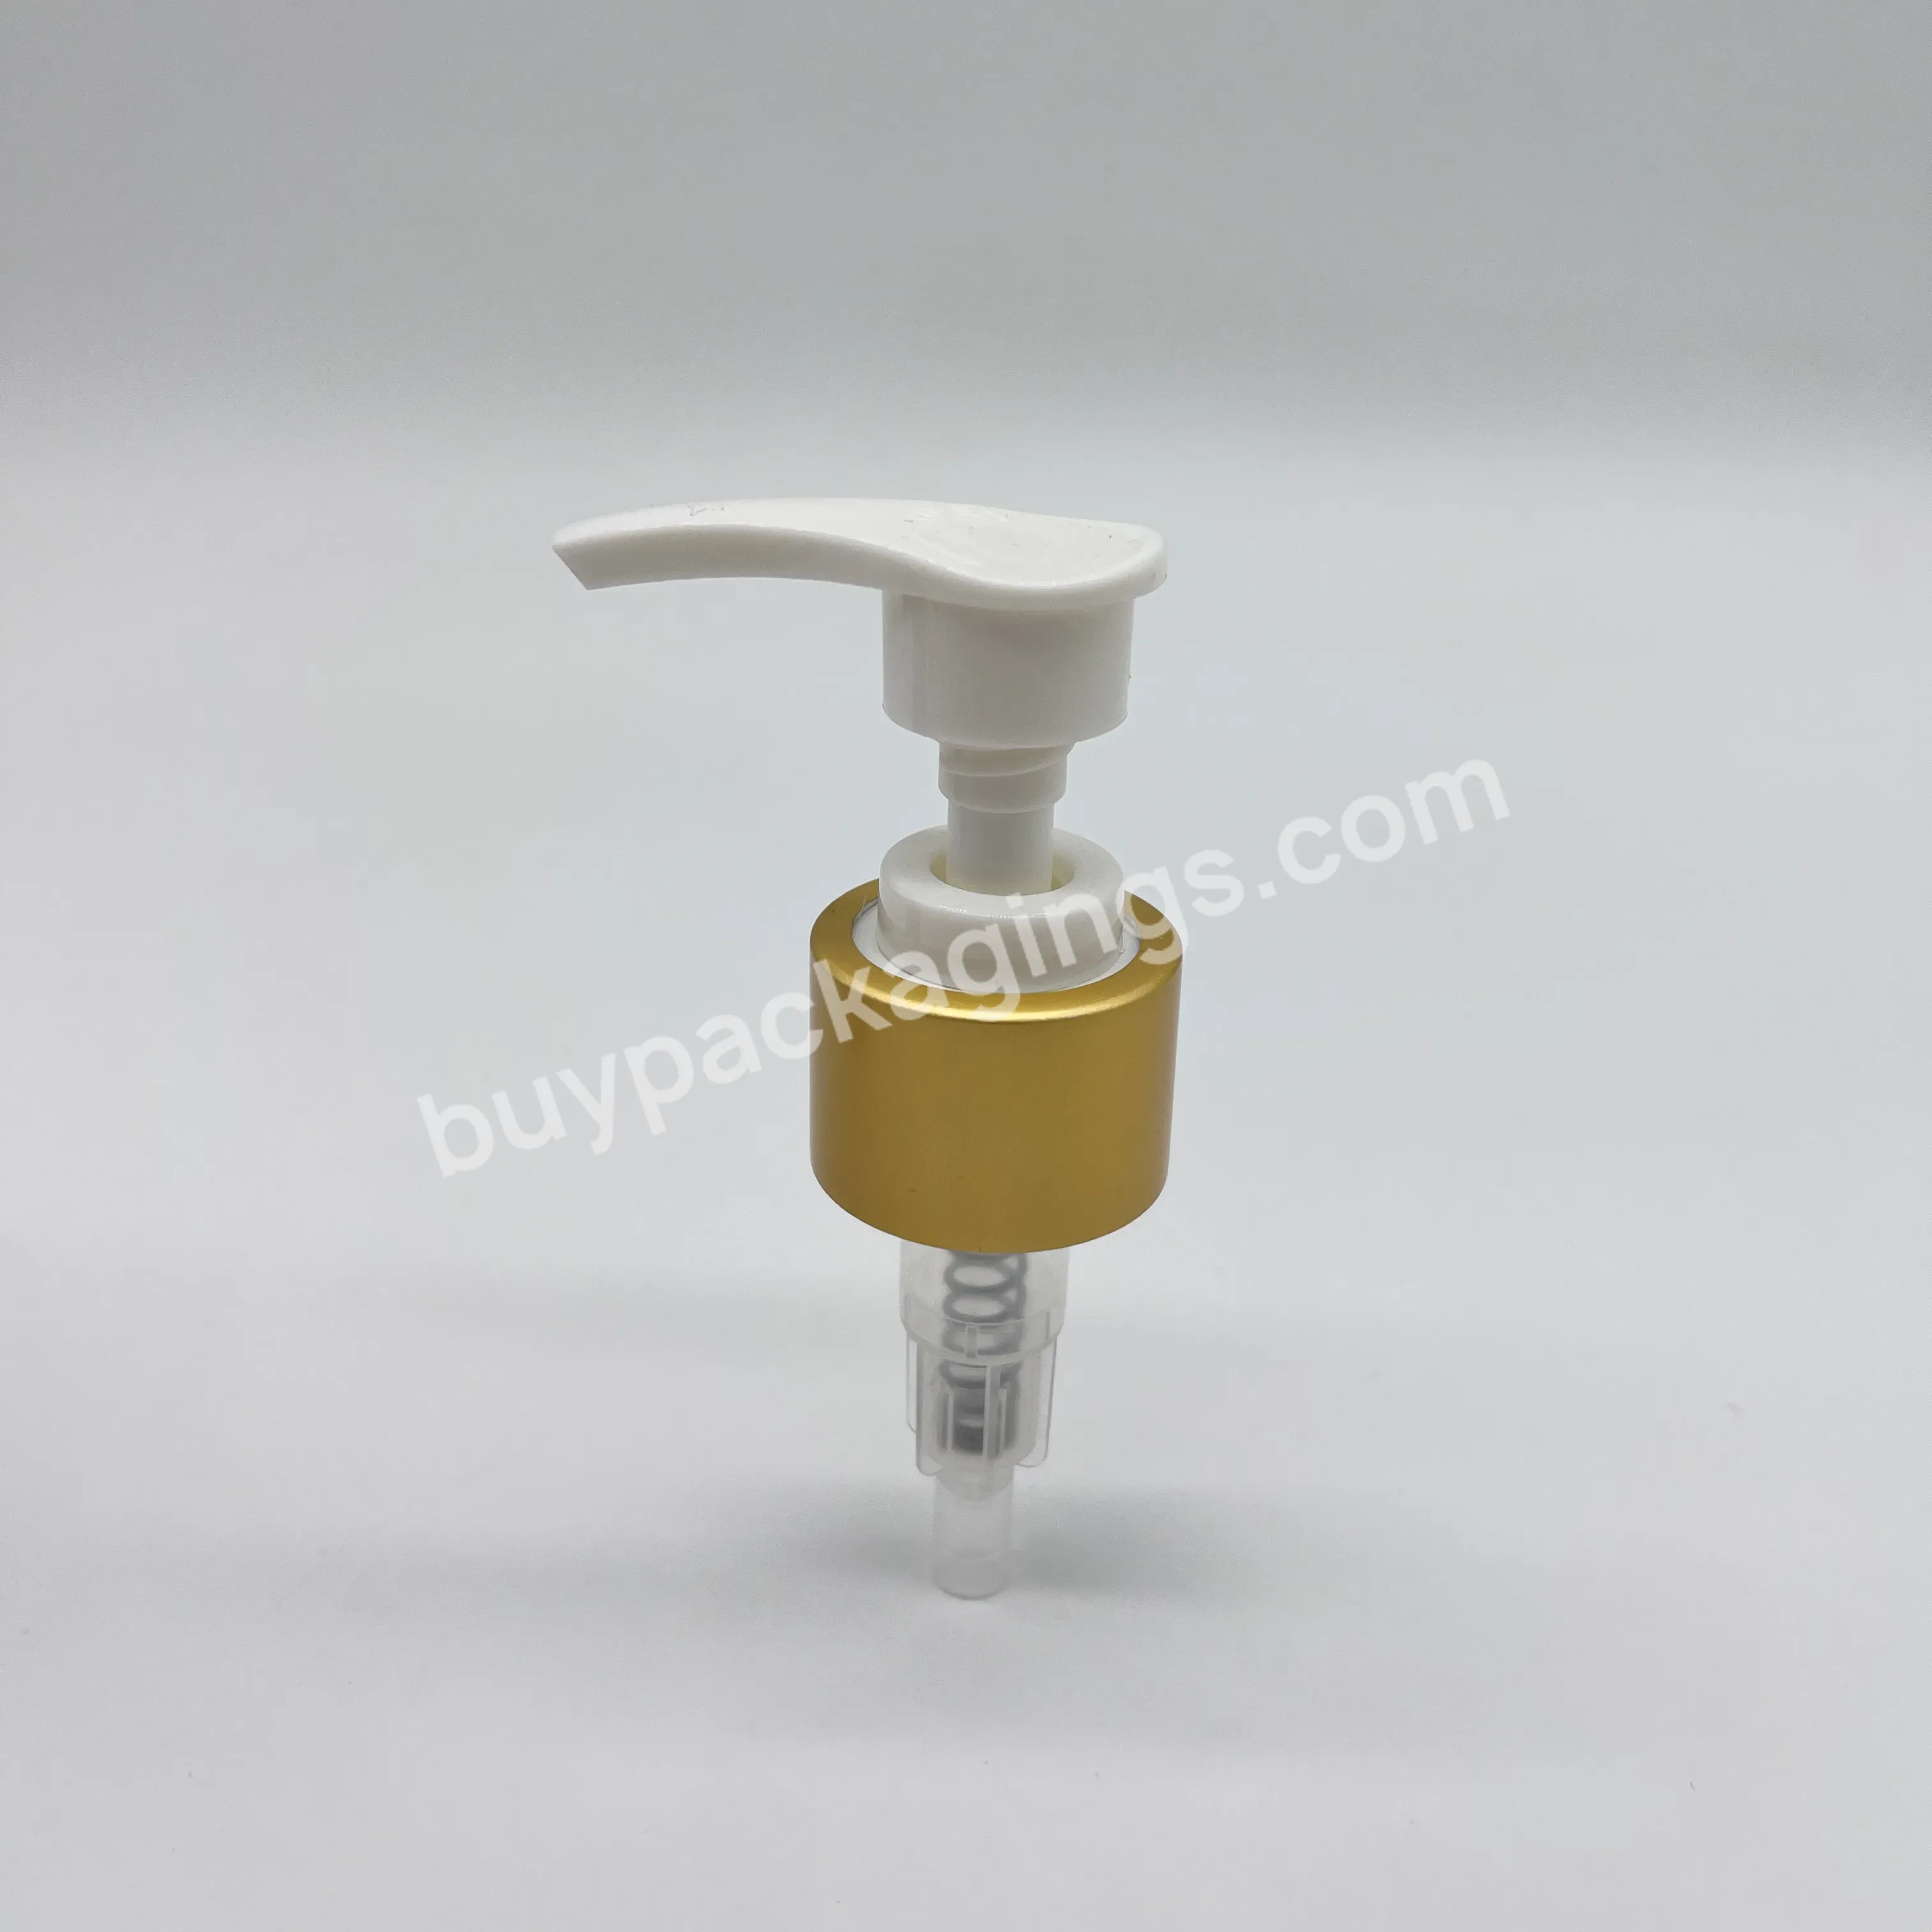 20/410 24/410 28/410 High Quality Matte Light Gold Collar Aluminum Lotion Pump With Twist Up Lock - Buy 24mm Metal Lotion Pump With Gold Collar,Aluminum Lotion Pump 24/410,Metal Cosmeticlotion Pump 24/410.